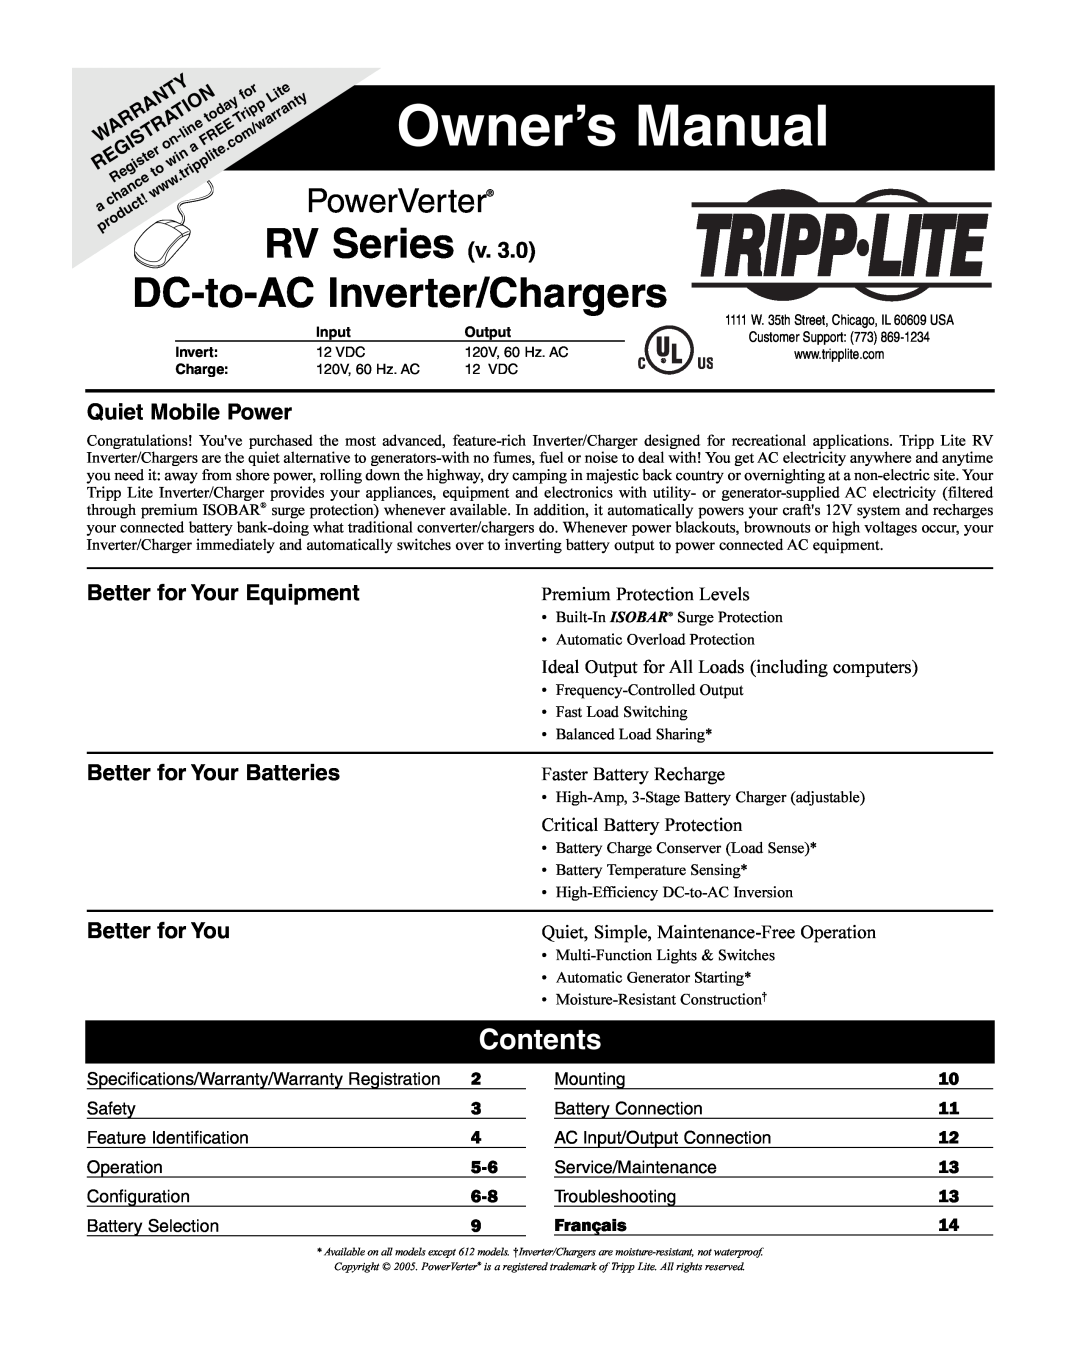 Tripp Lite 200502023 owner manual Contents, Quiet Mobile Power, Better for Your Equipment, Better for Your Batteries 